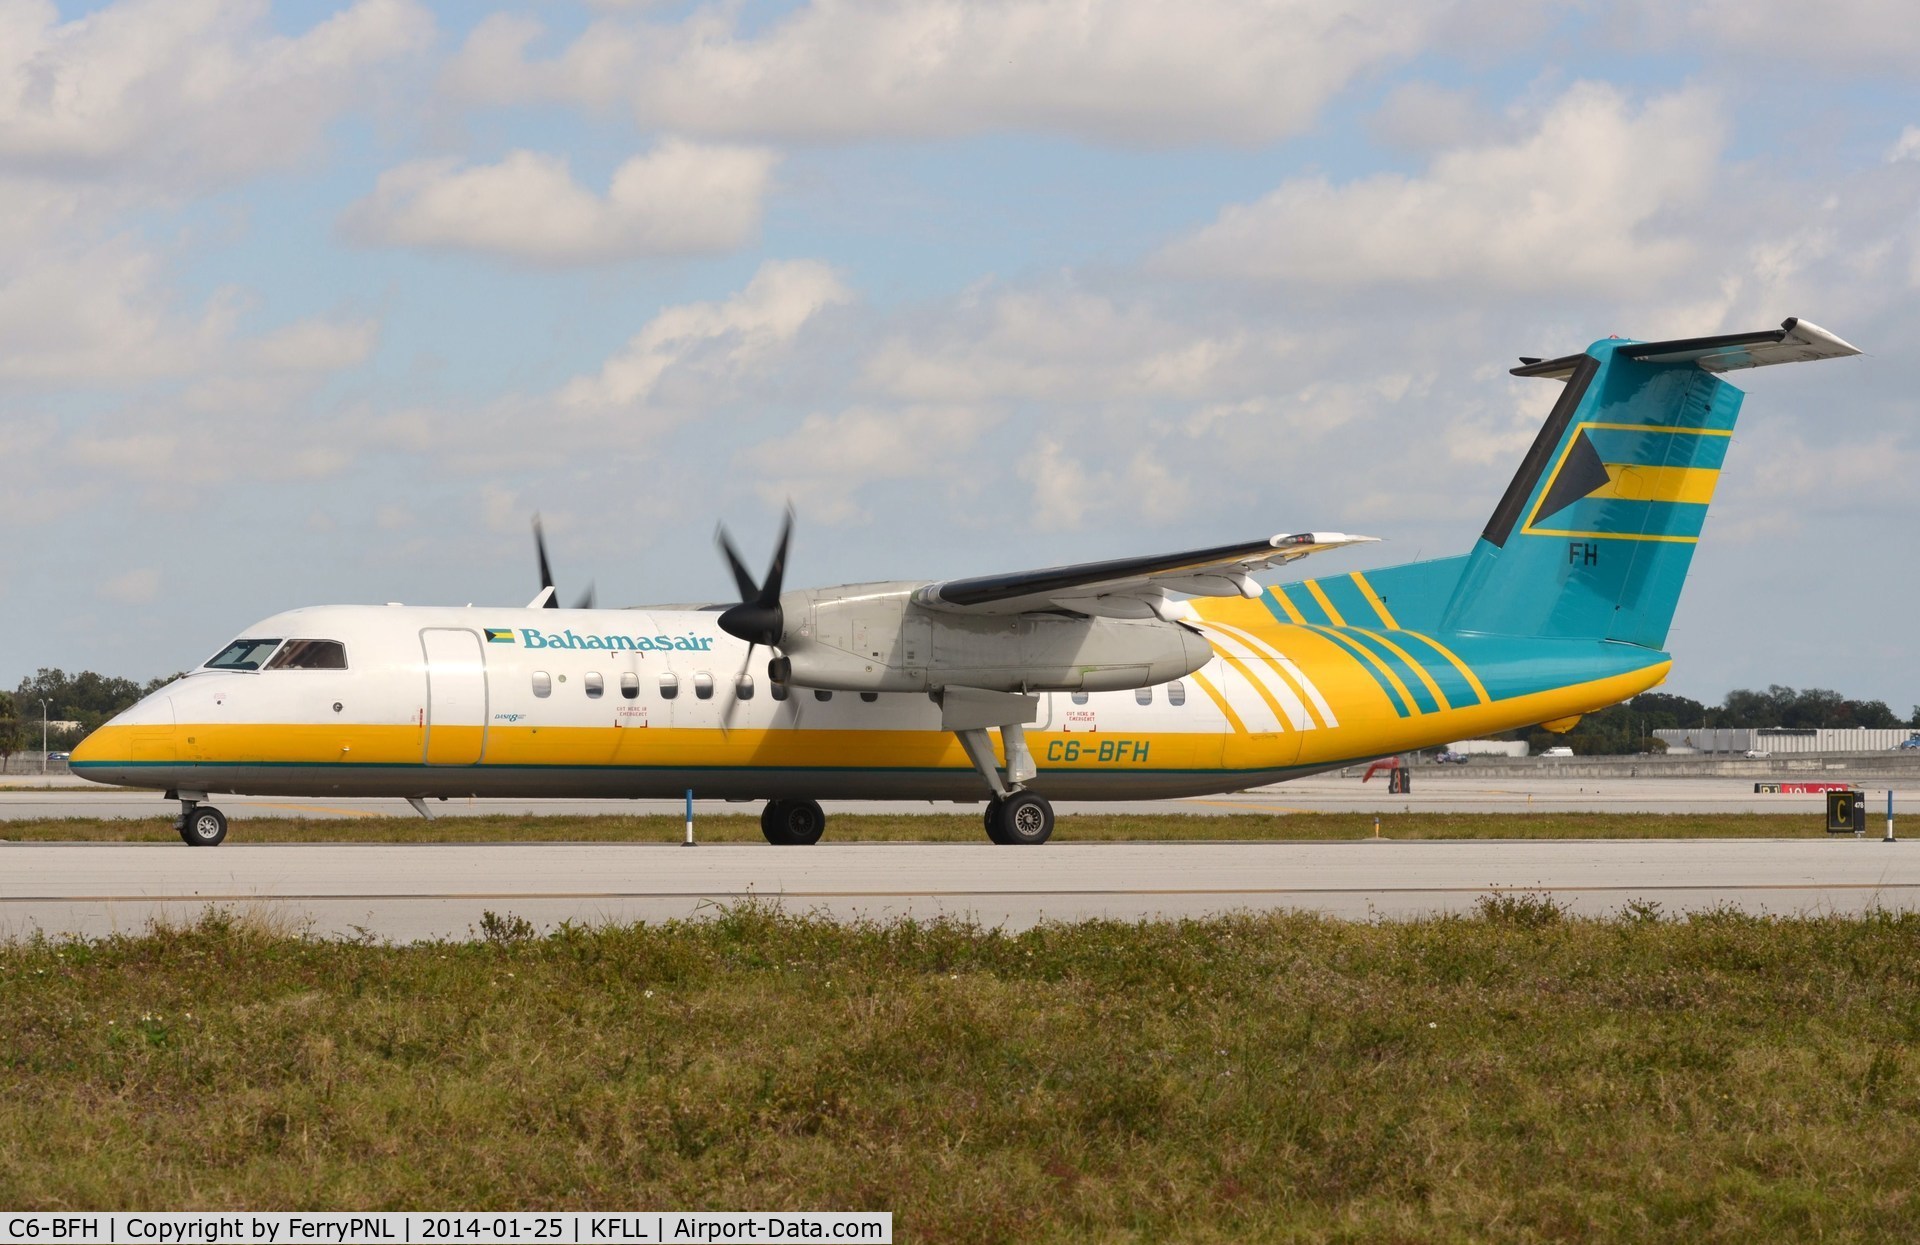 C6-BFH, 1991 De Havilland Canada DHC-8-300 Dash 8 C/N 291, Bahamasair DHC8 taxying to for departure.